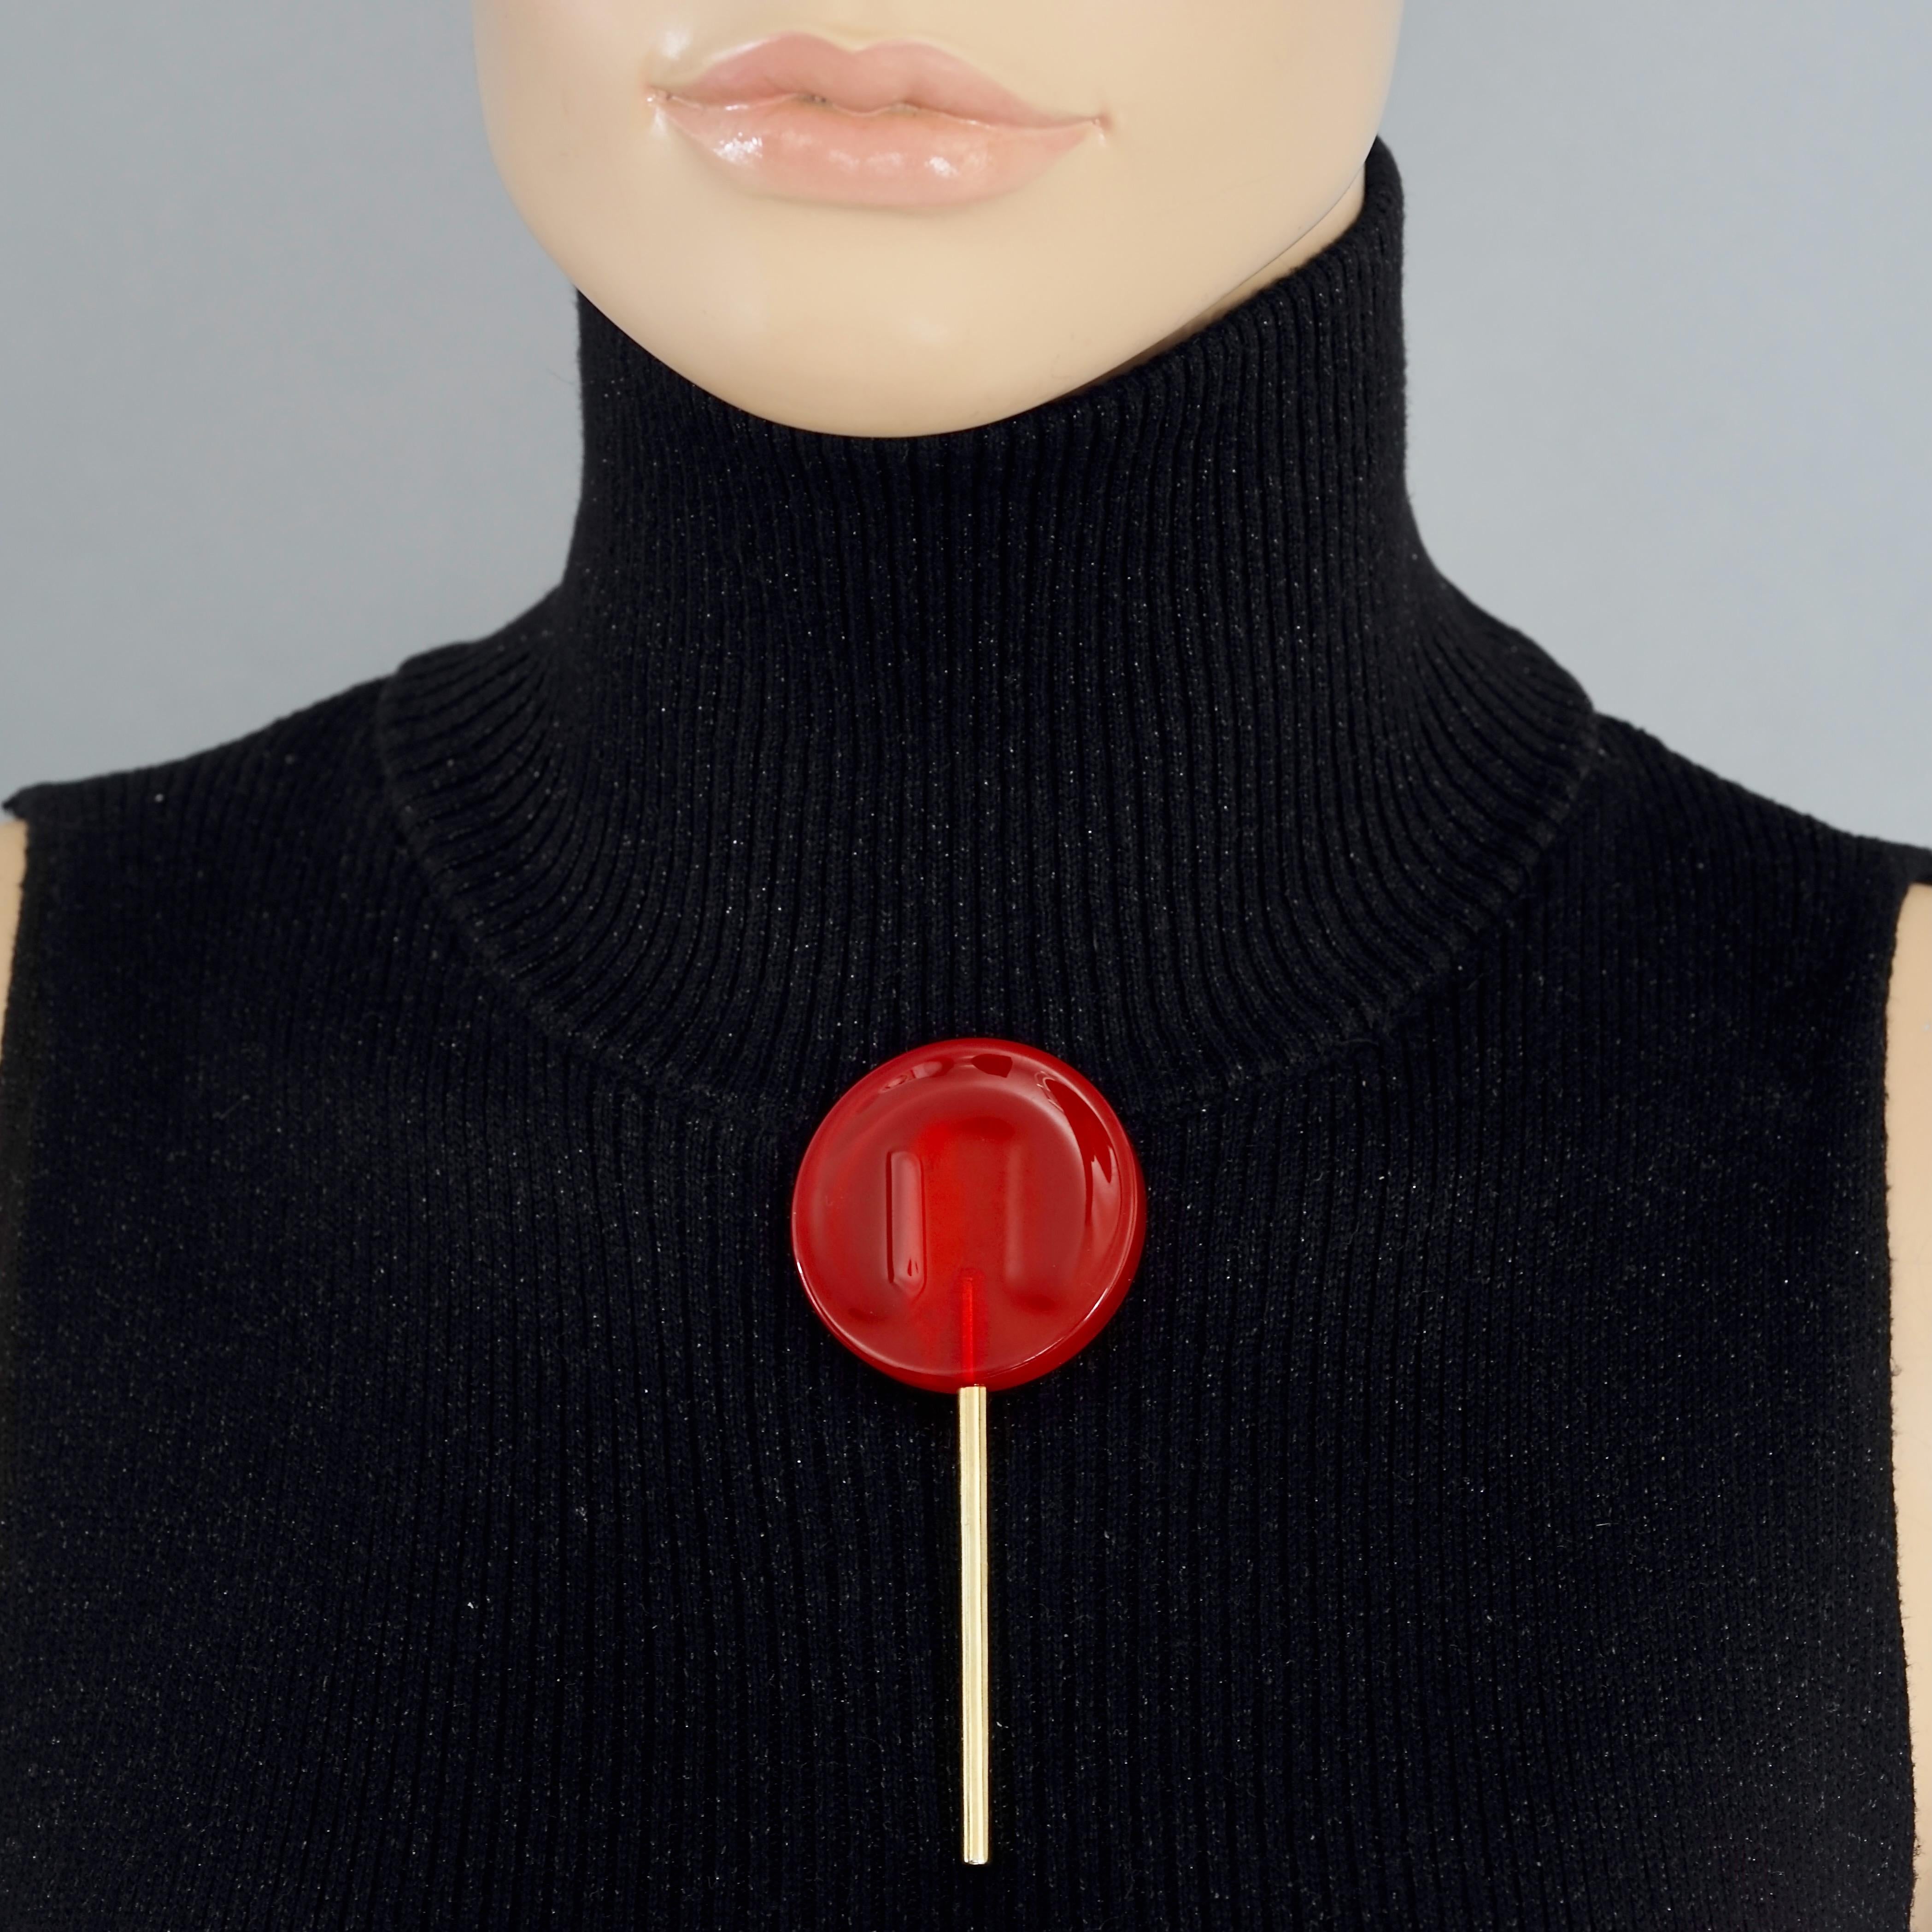 Vintage MOSCHINO Red Cherry Lollipop Candy Novelty Brooch

Measurements: 
Height: 4.13 inches (10.5 cm)
Diameter: 1.77 inches (4.5 cm)

Features:
- 100% Authentic MOSCHINO.
- Red cherry lollipop candy resin novelty brooch.
- Engraved MOSCHINO CHEAP